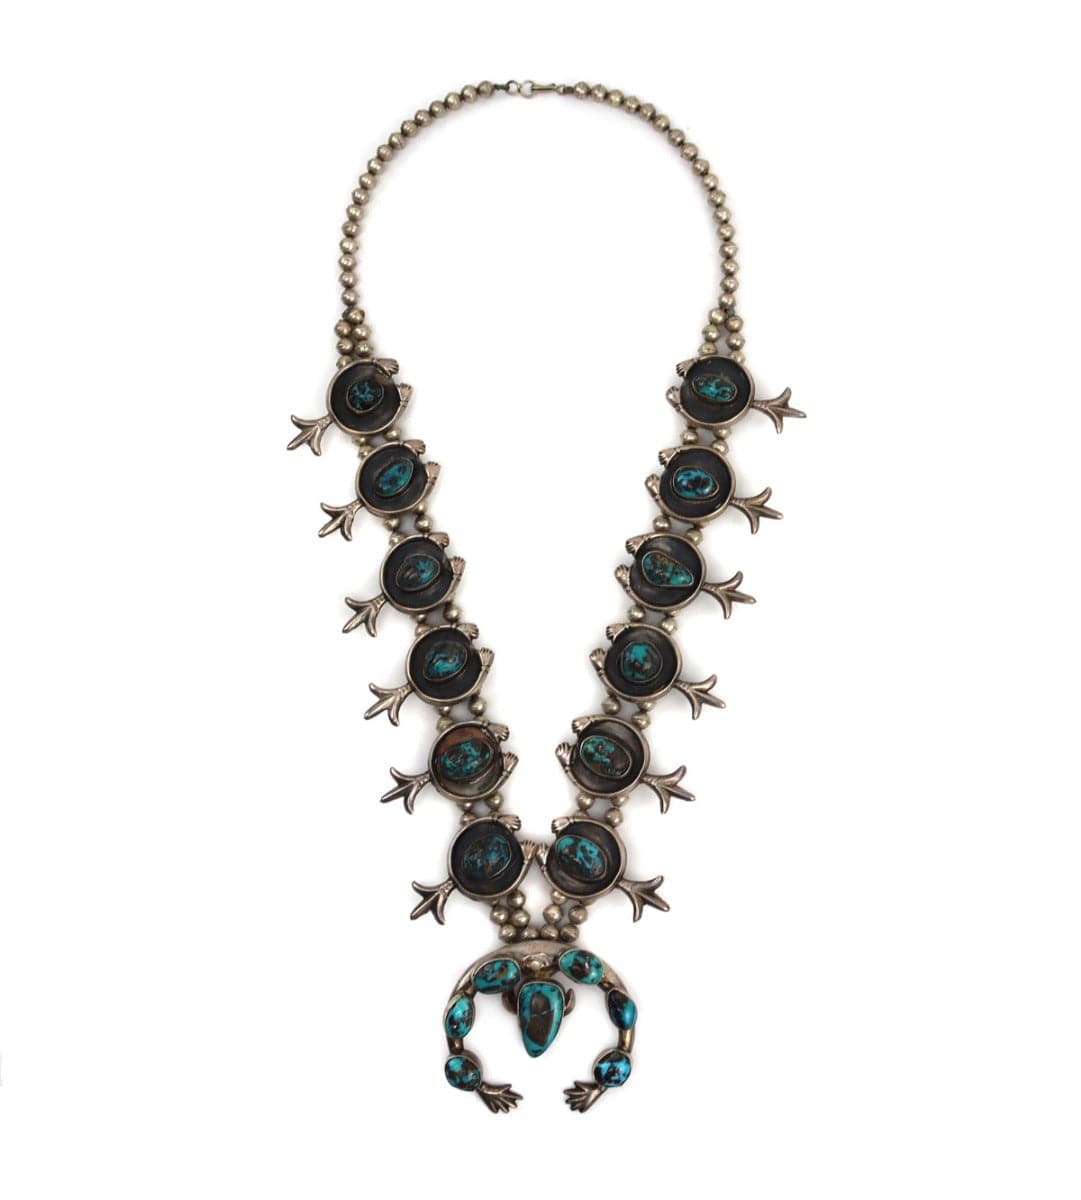 Navajo Persian Turquoise and Silver Squash Blossom Necklace c. 1950s, 28" length (J15240-CO-008)